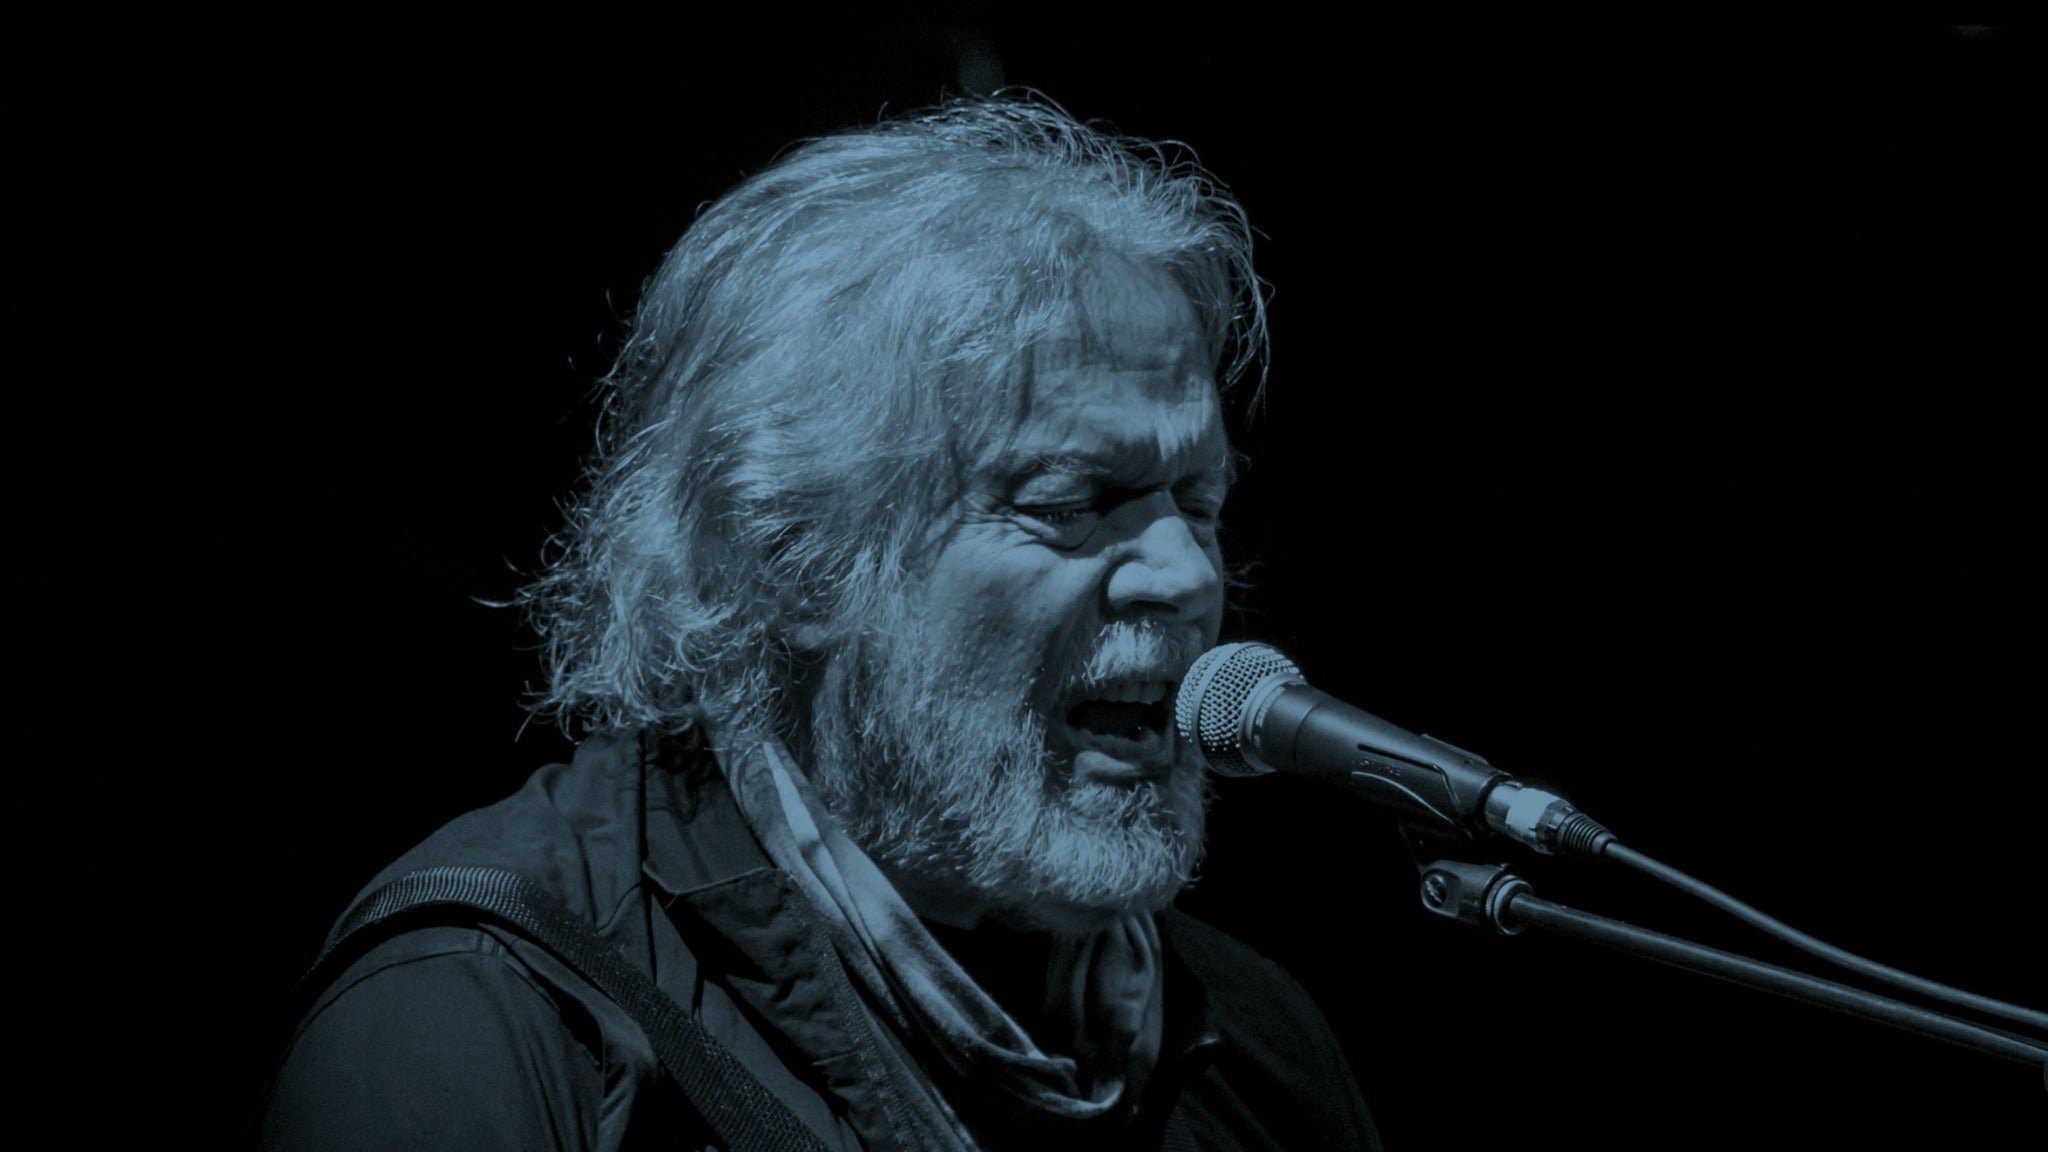 Randy Bachman in Enoch promo photo for Facebook, Media and Artist presale offer code